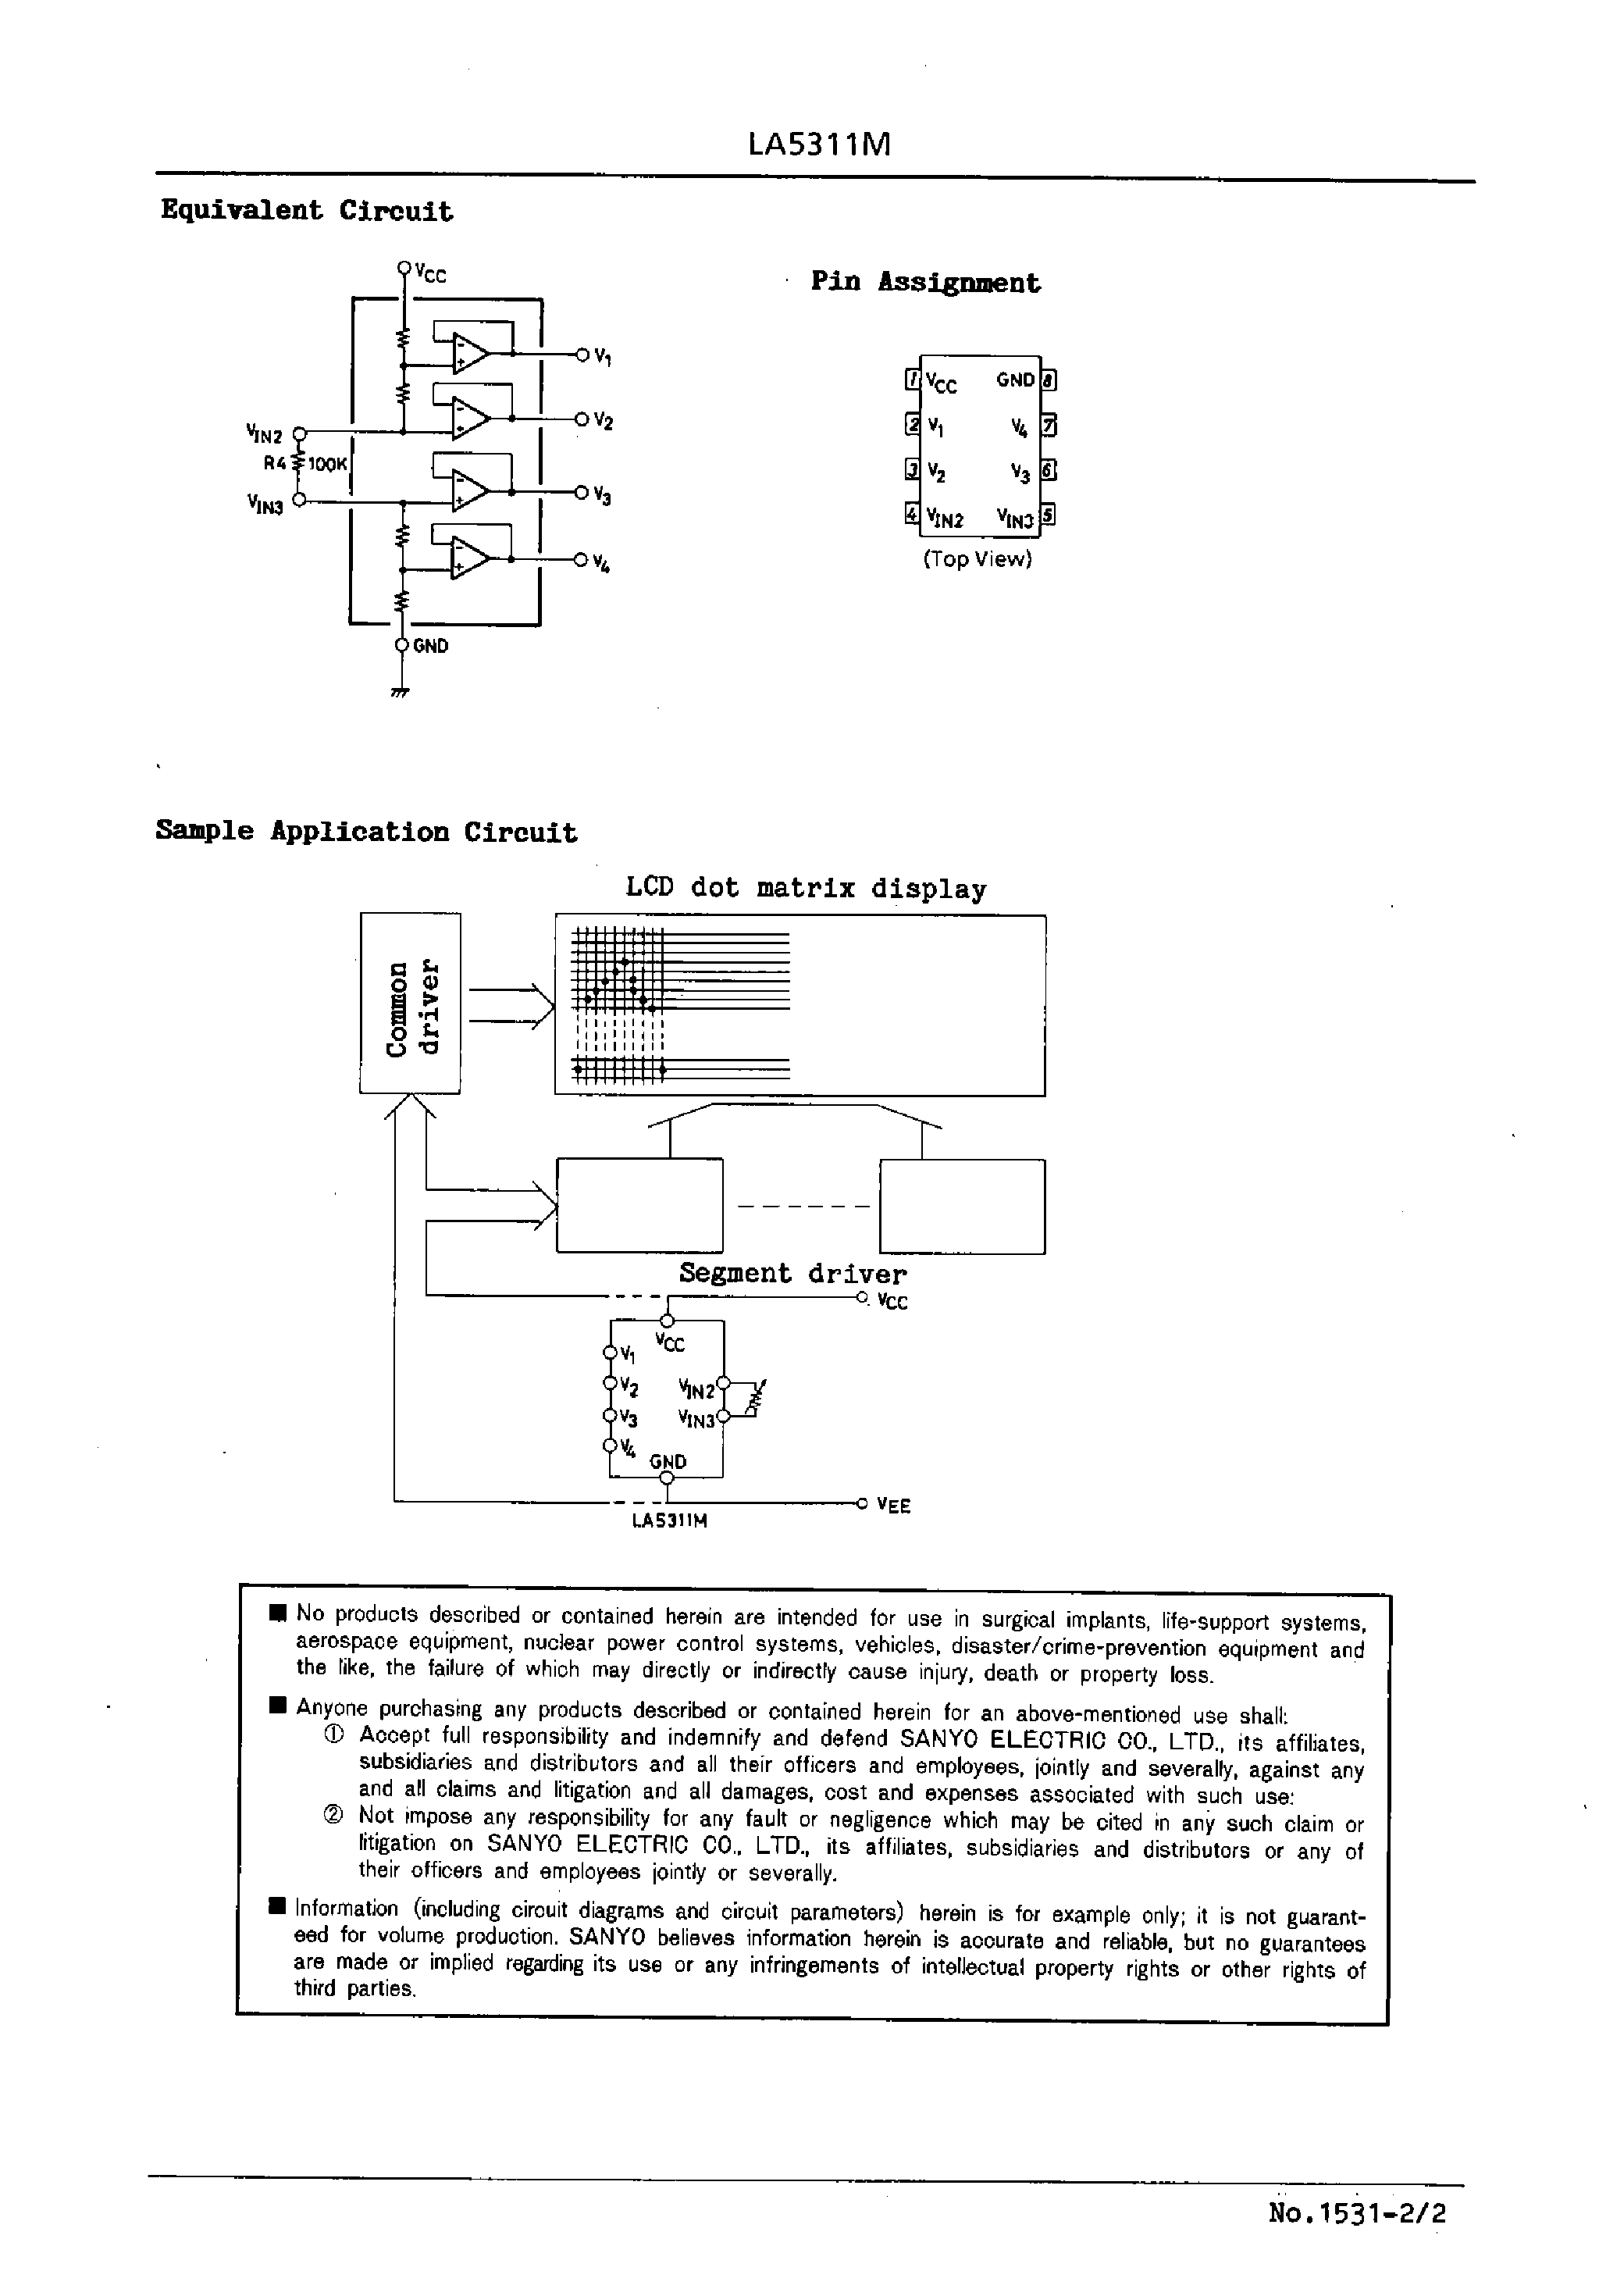 Datasheet LA5311 - Variable Drivided Voltage Generator for LCD page 2